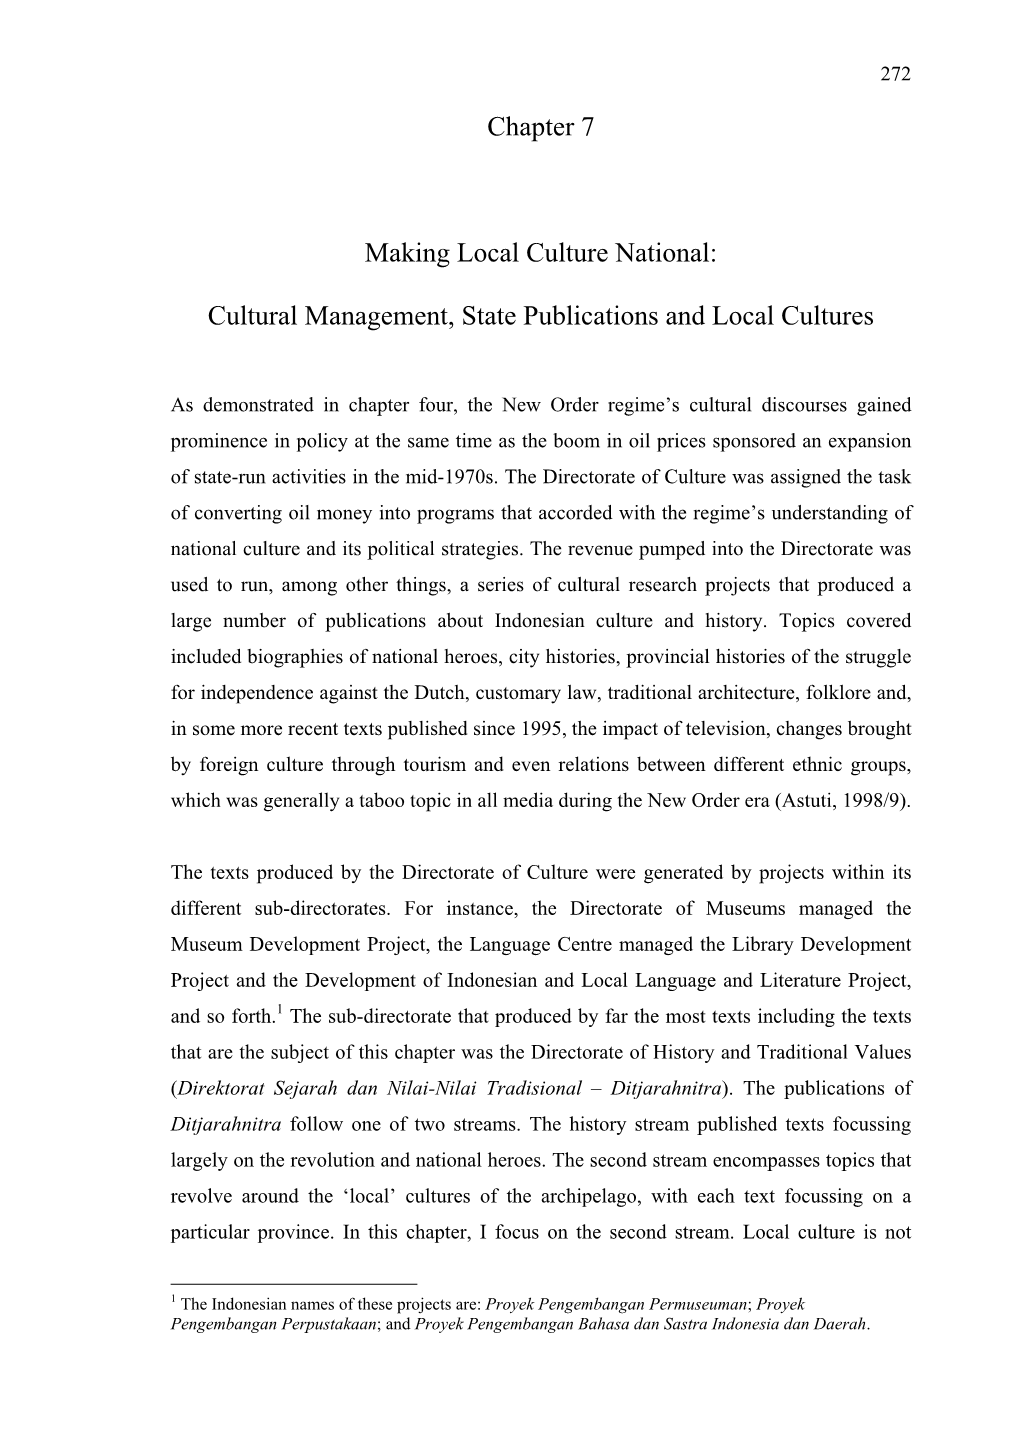 Cultural Management, State Publications and Local Cultures